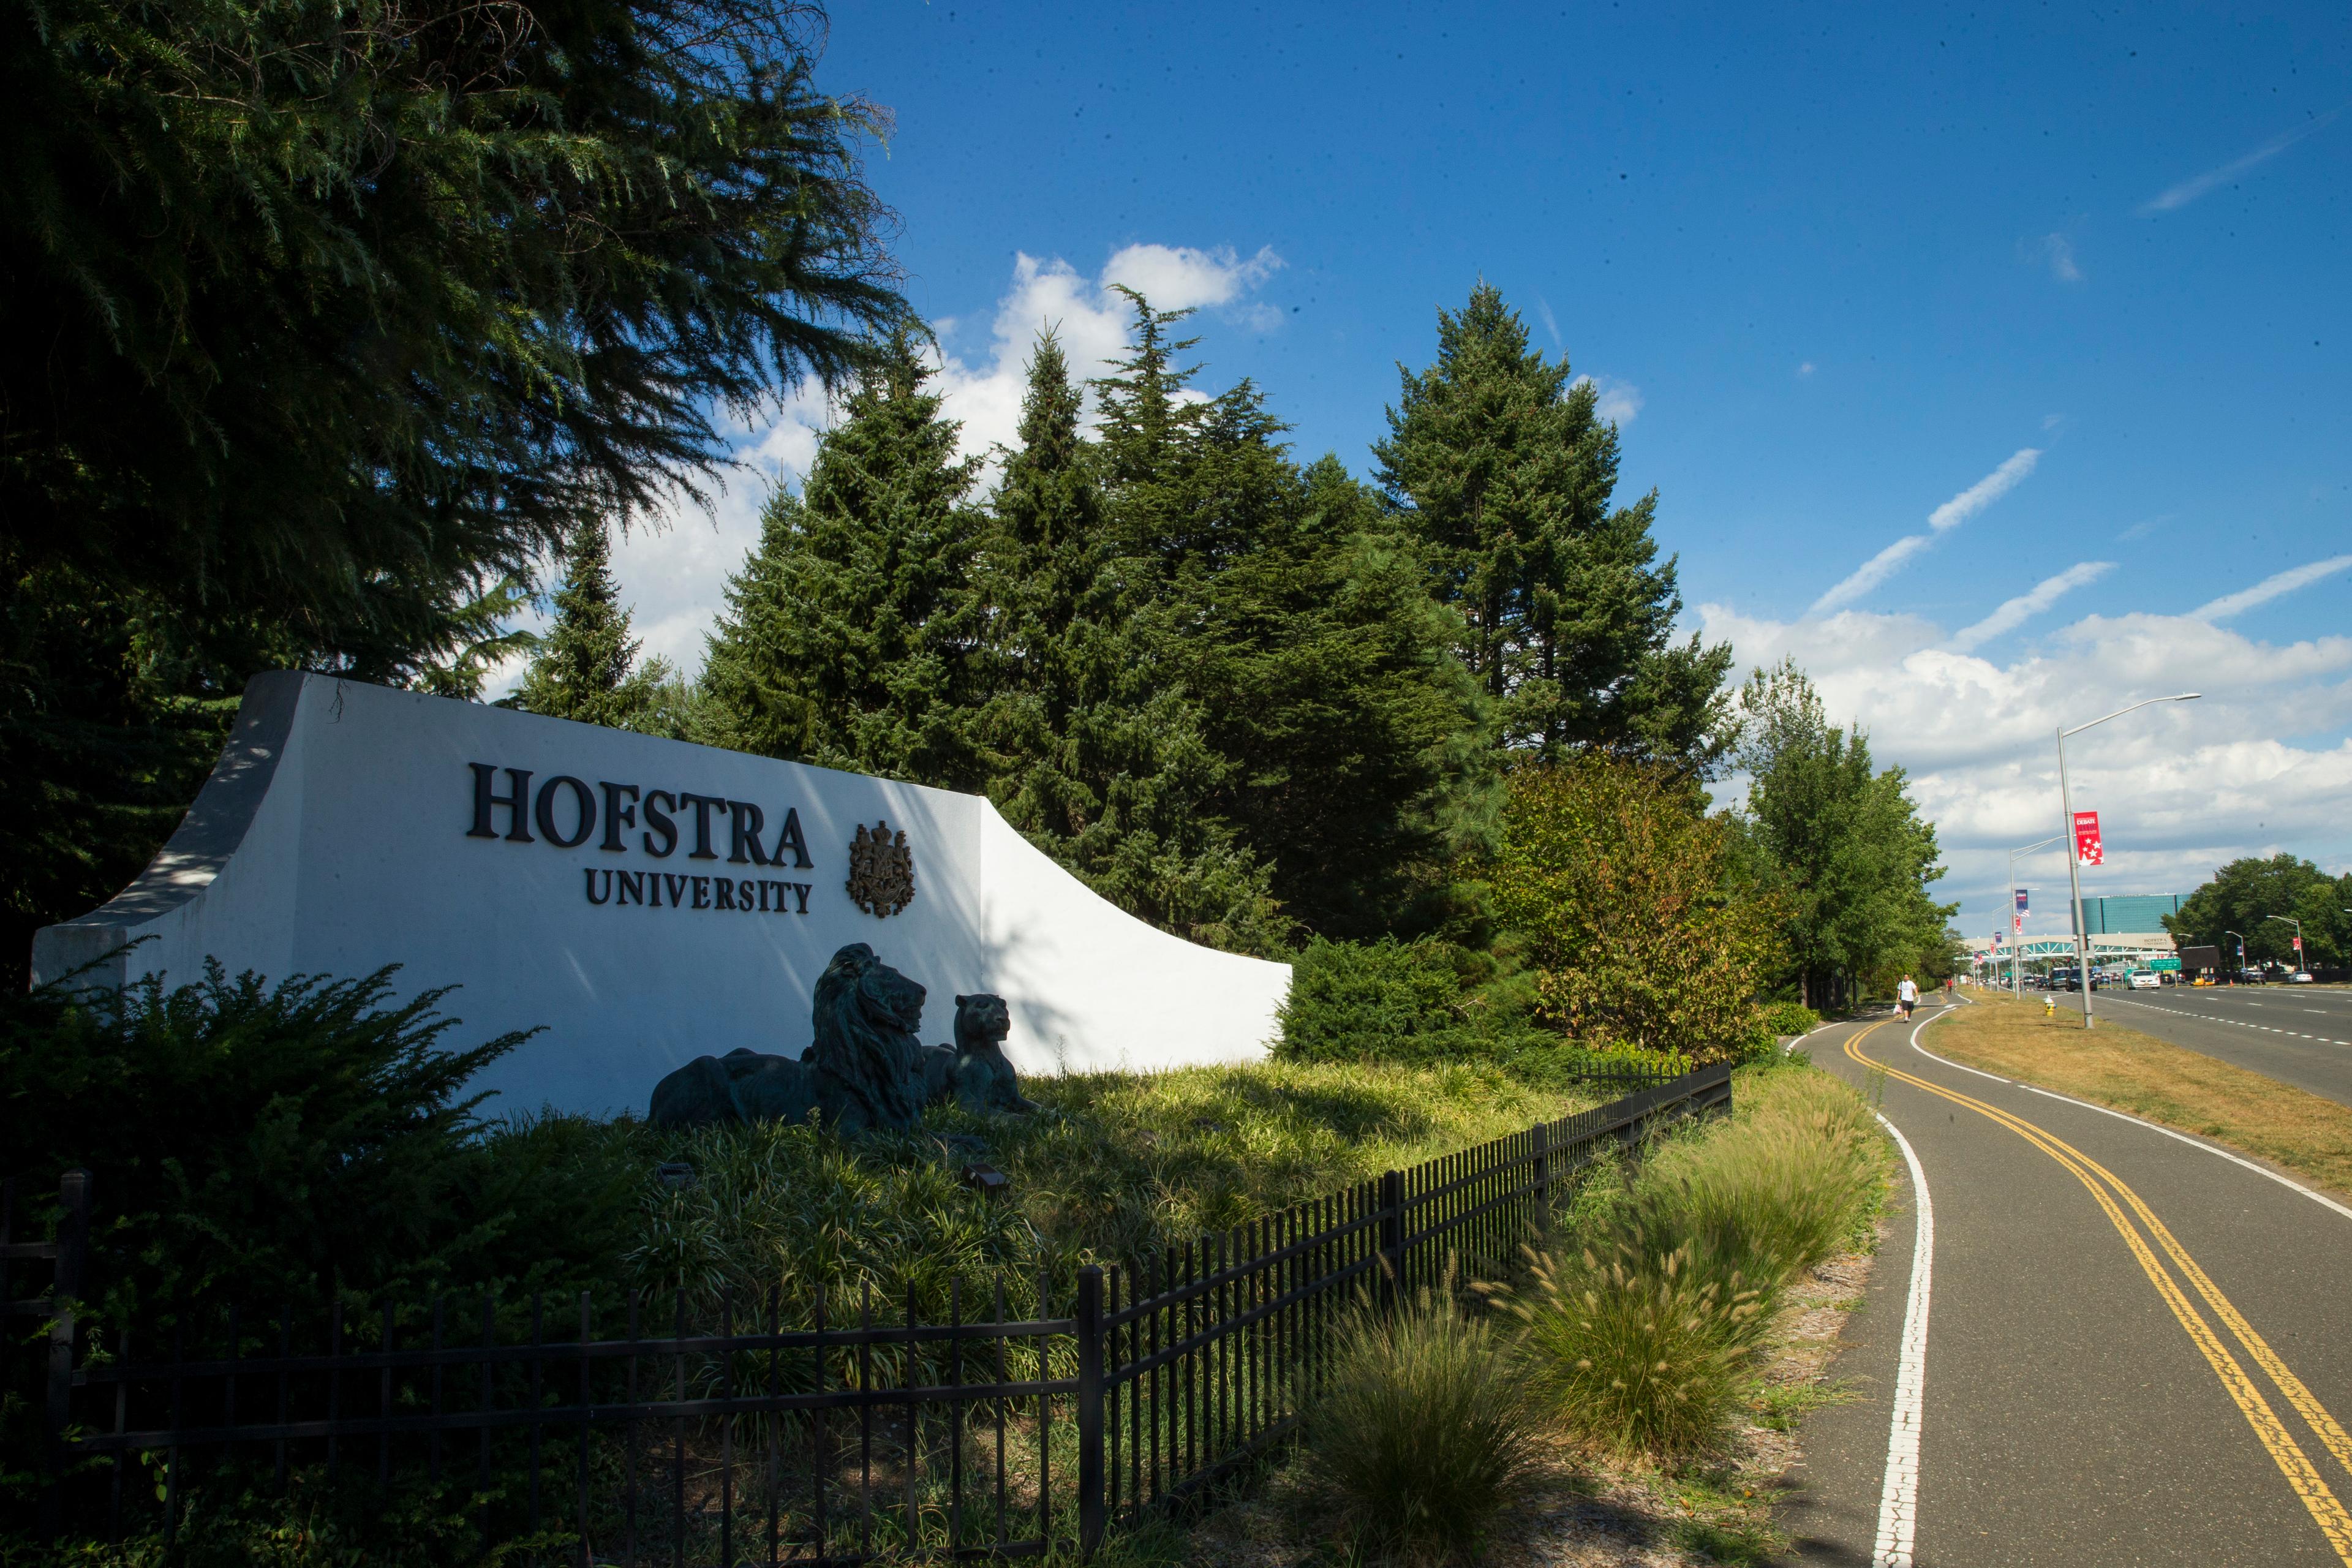 Hofstra view from the entrance of the university with the name mural close to a bike road_36514.jpg